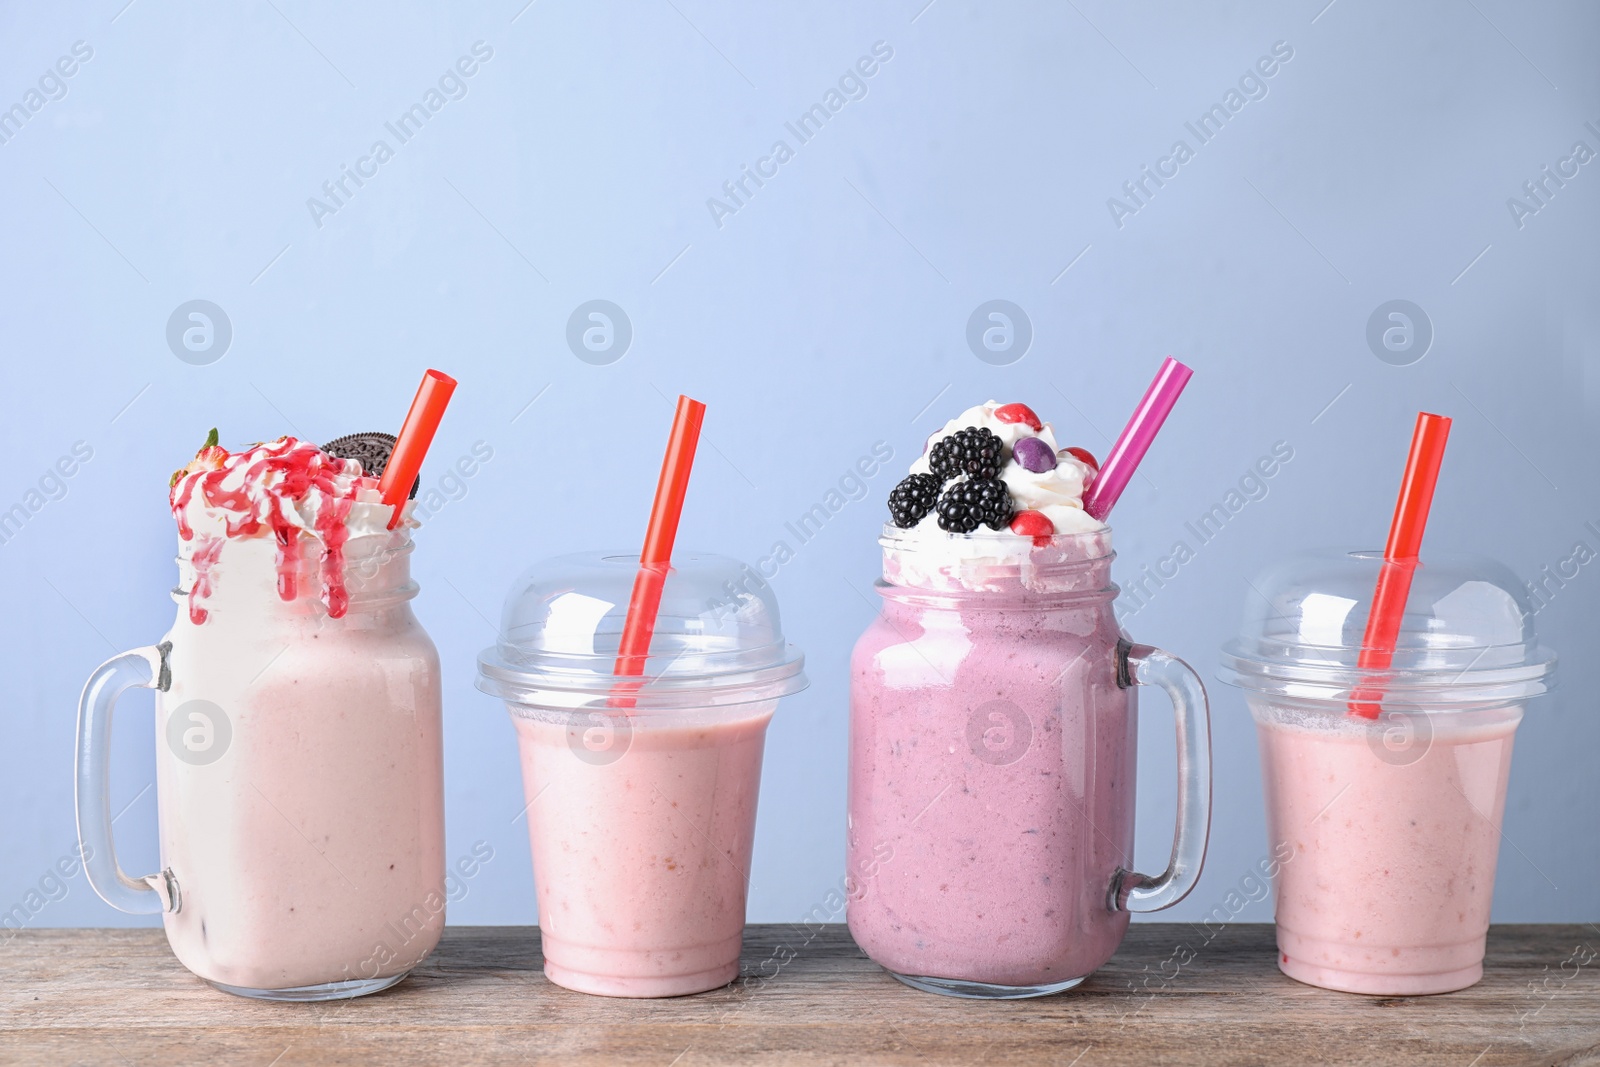 Photo of Different tasty milk shakes in mason jars and plastic cups on wooden table